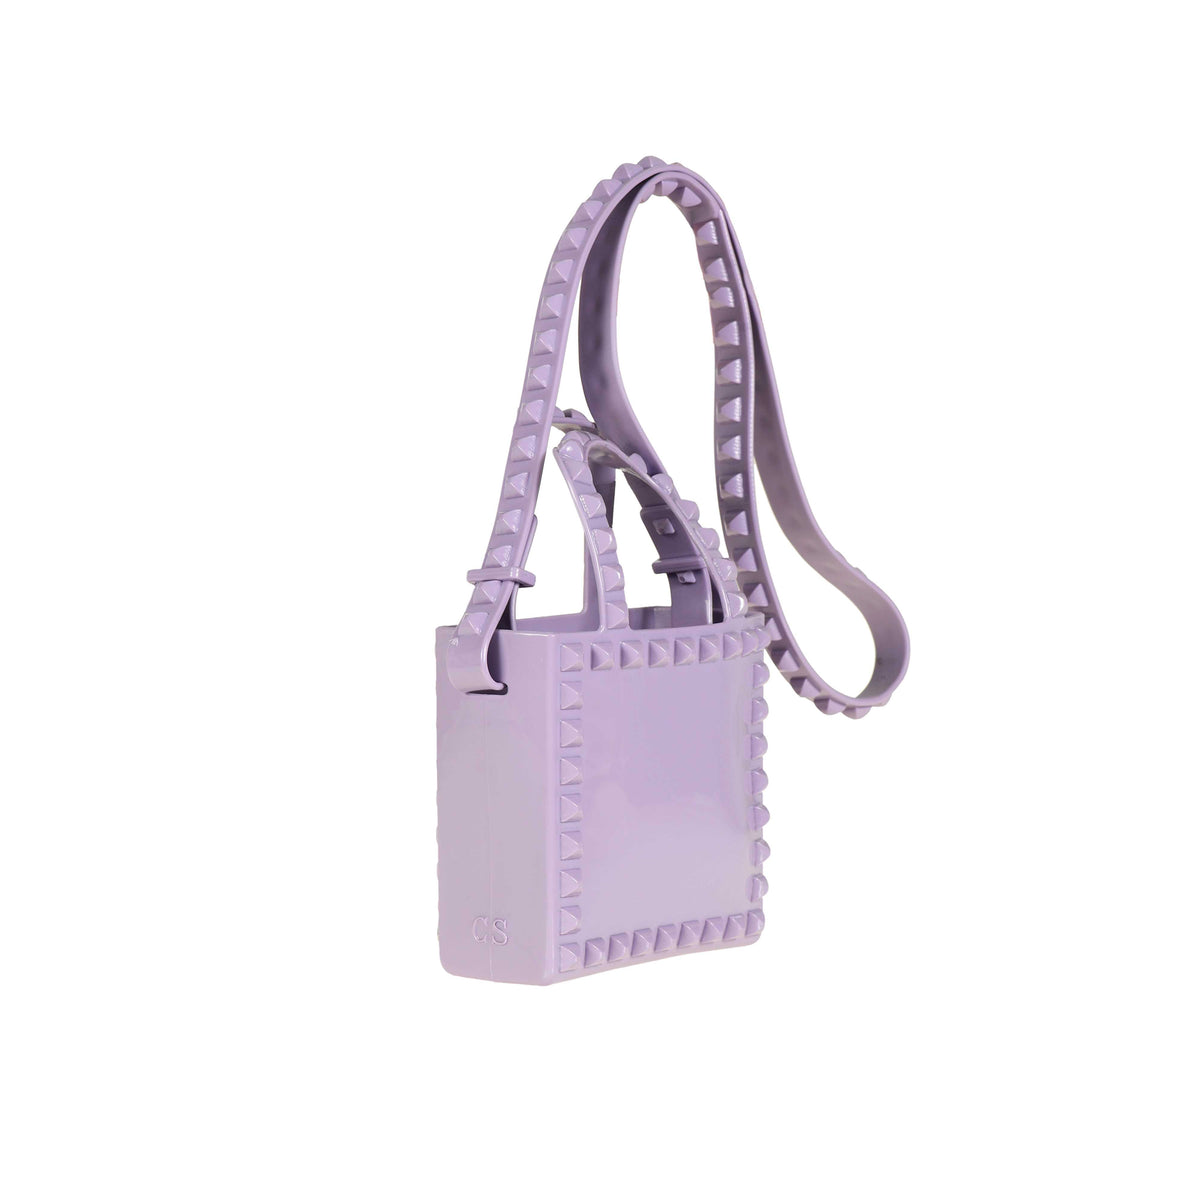 Violet jelly kids shoulder bag from minicarmensol attracts vacation lovers.